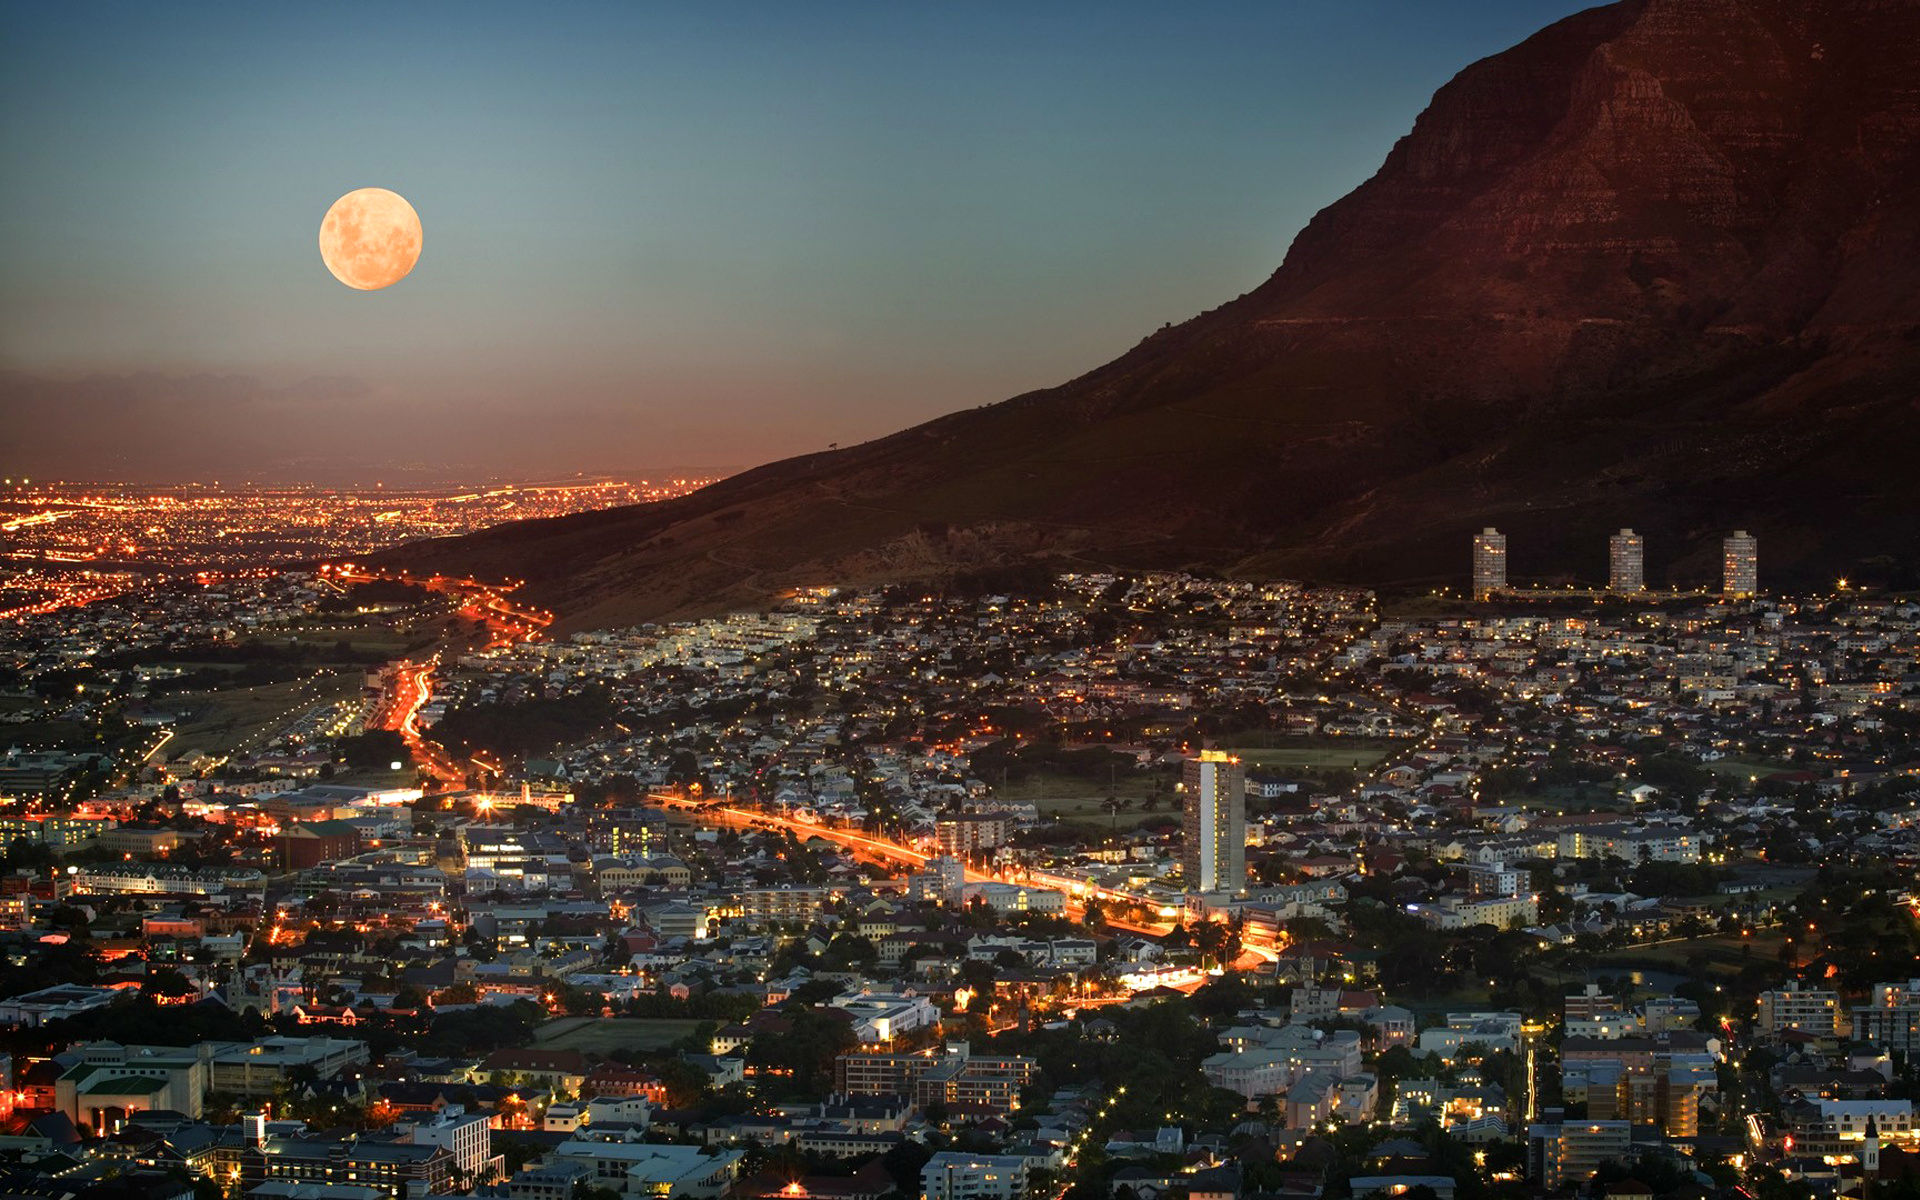 New Lock Screen Wallpapers cape town, man made